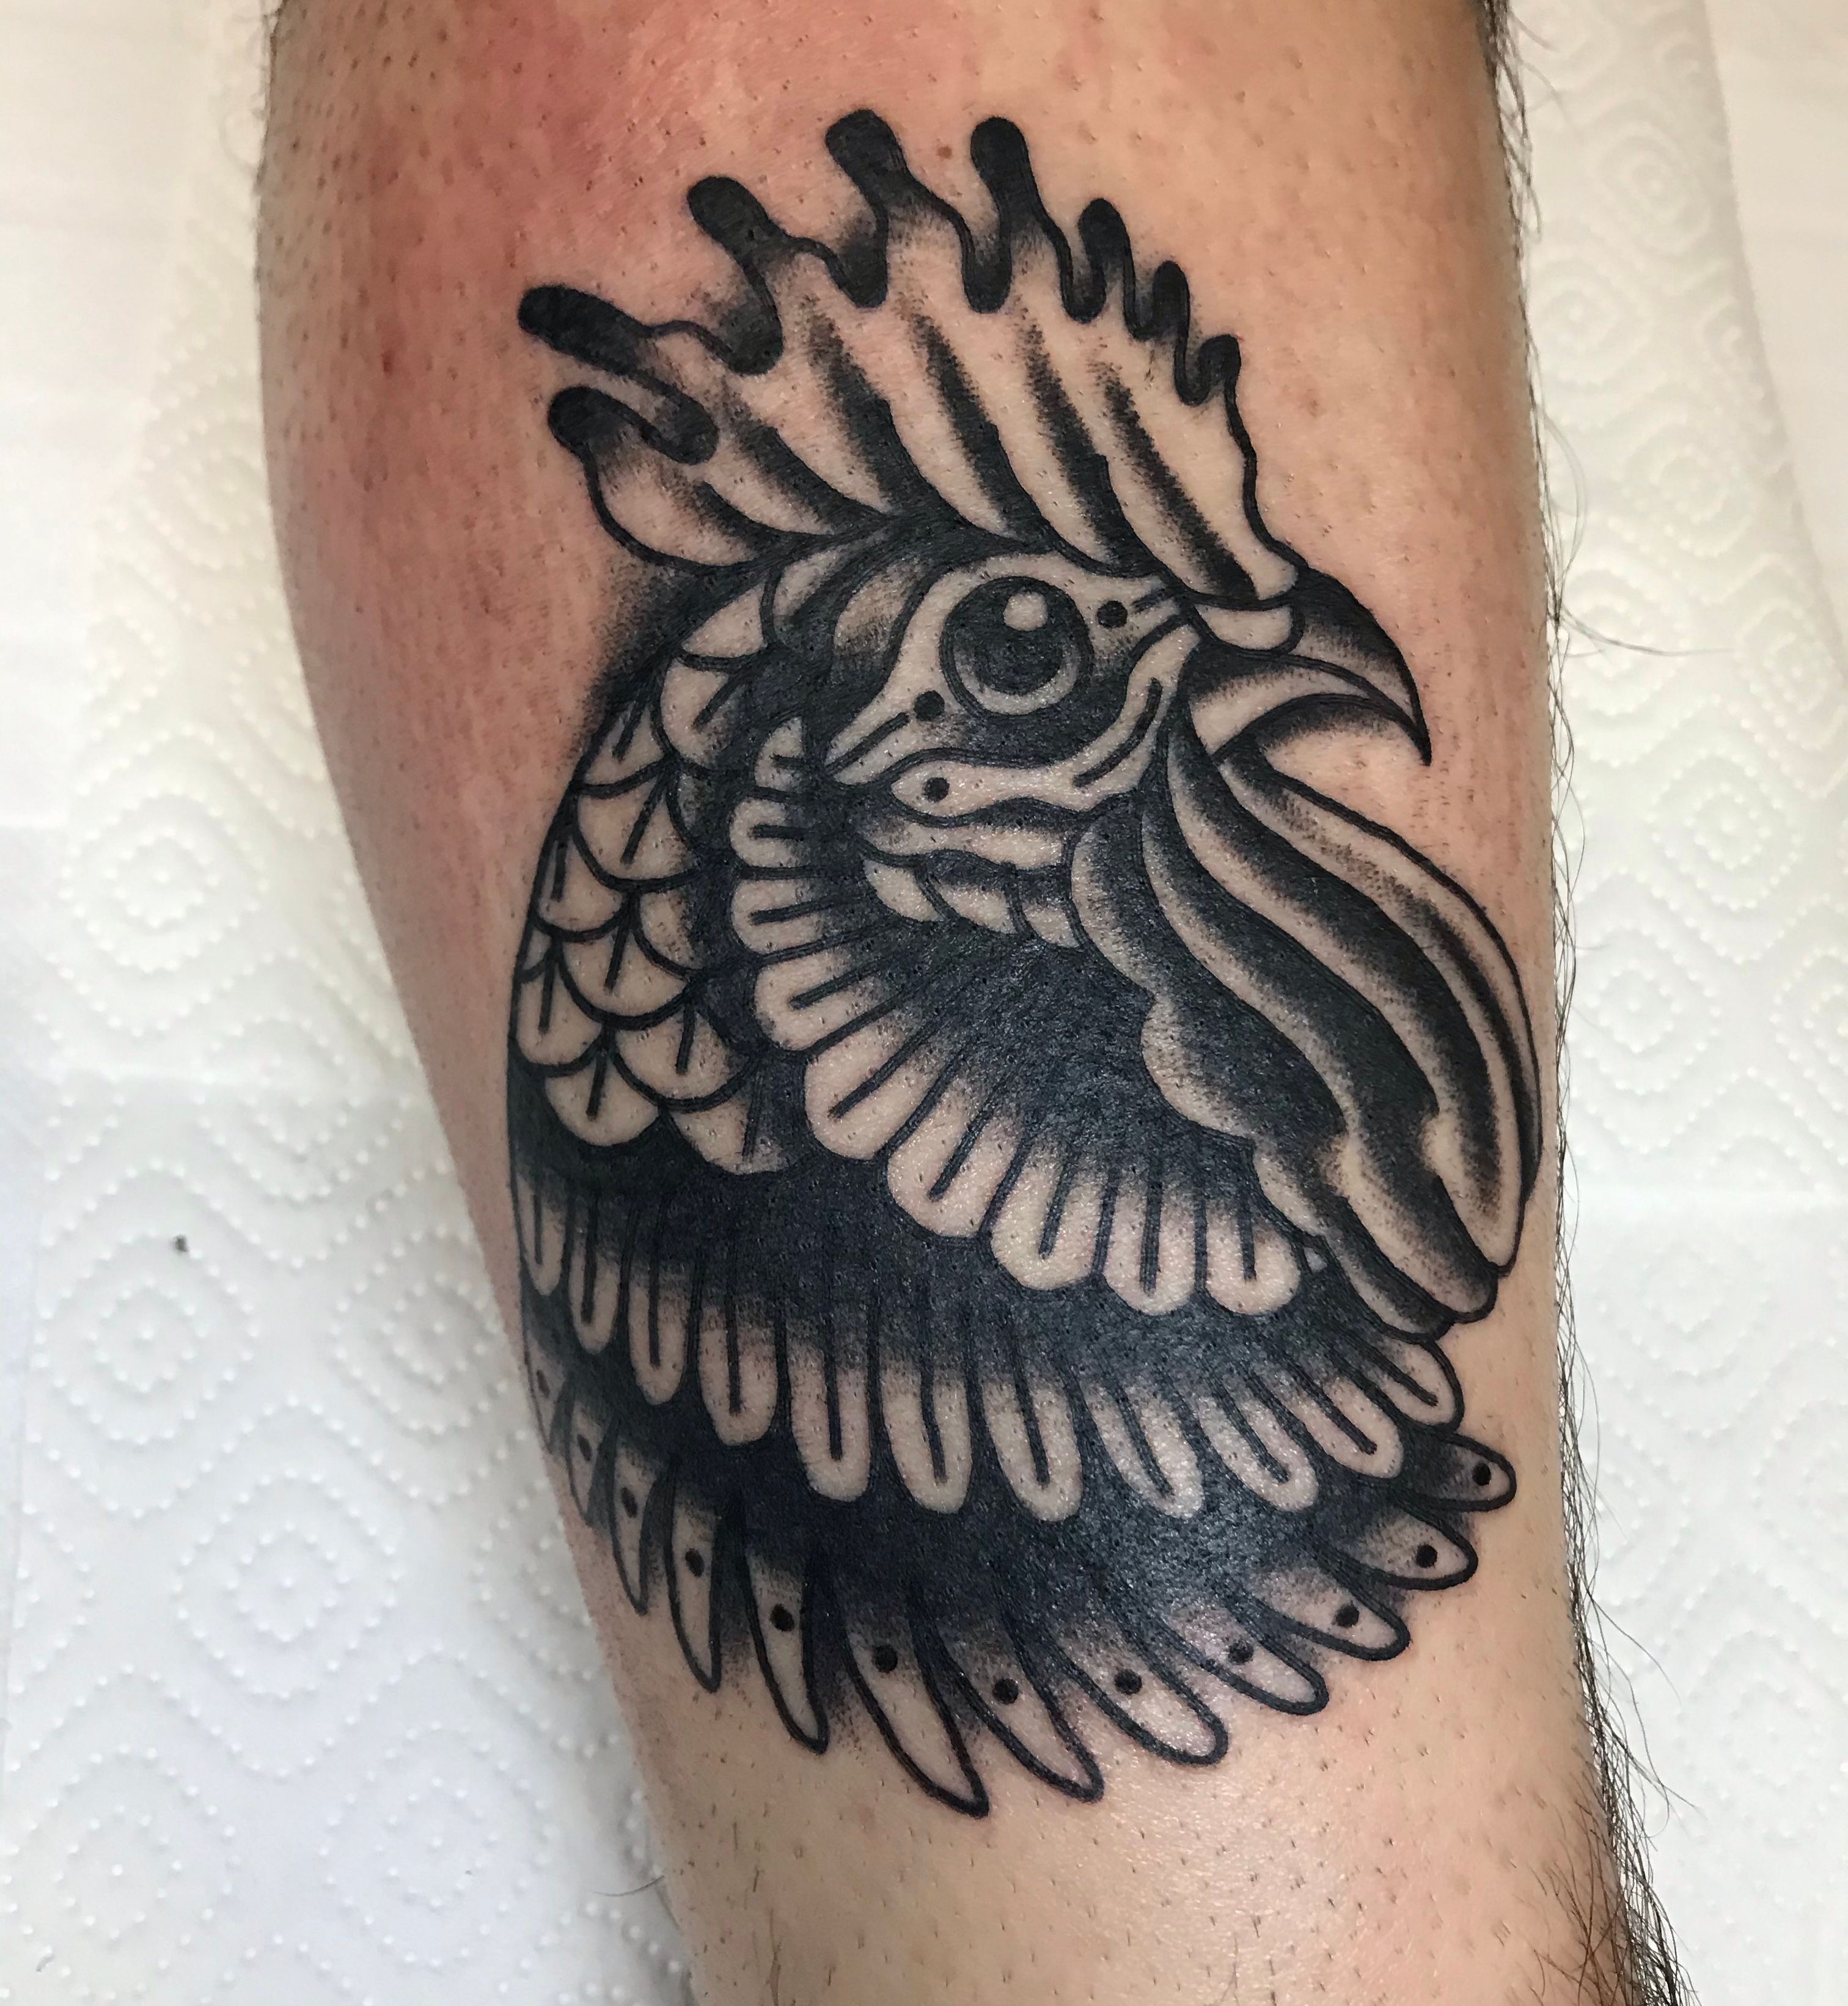 Rooster tattoo located on the thigh blackwork style